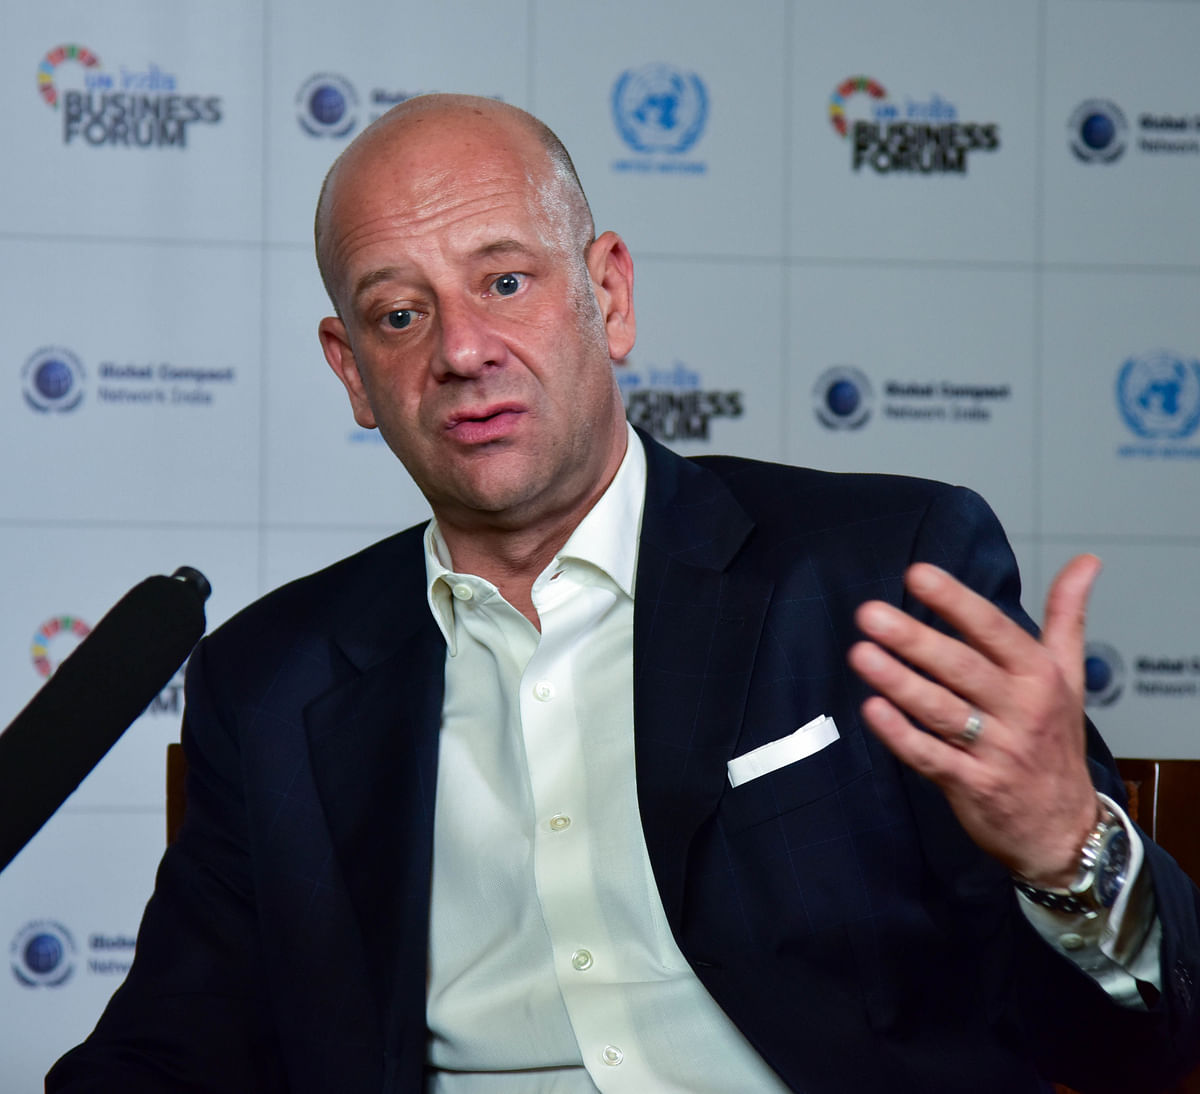 Corporates have to focus on triple bottom line now: Yuri Afanasiev  